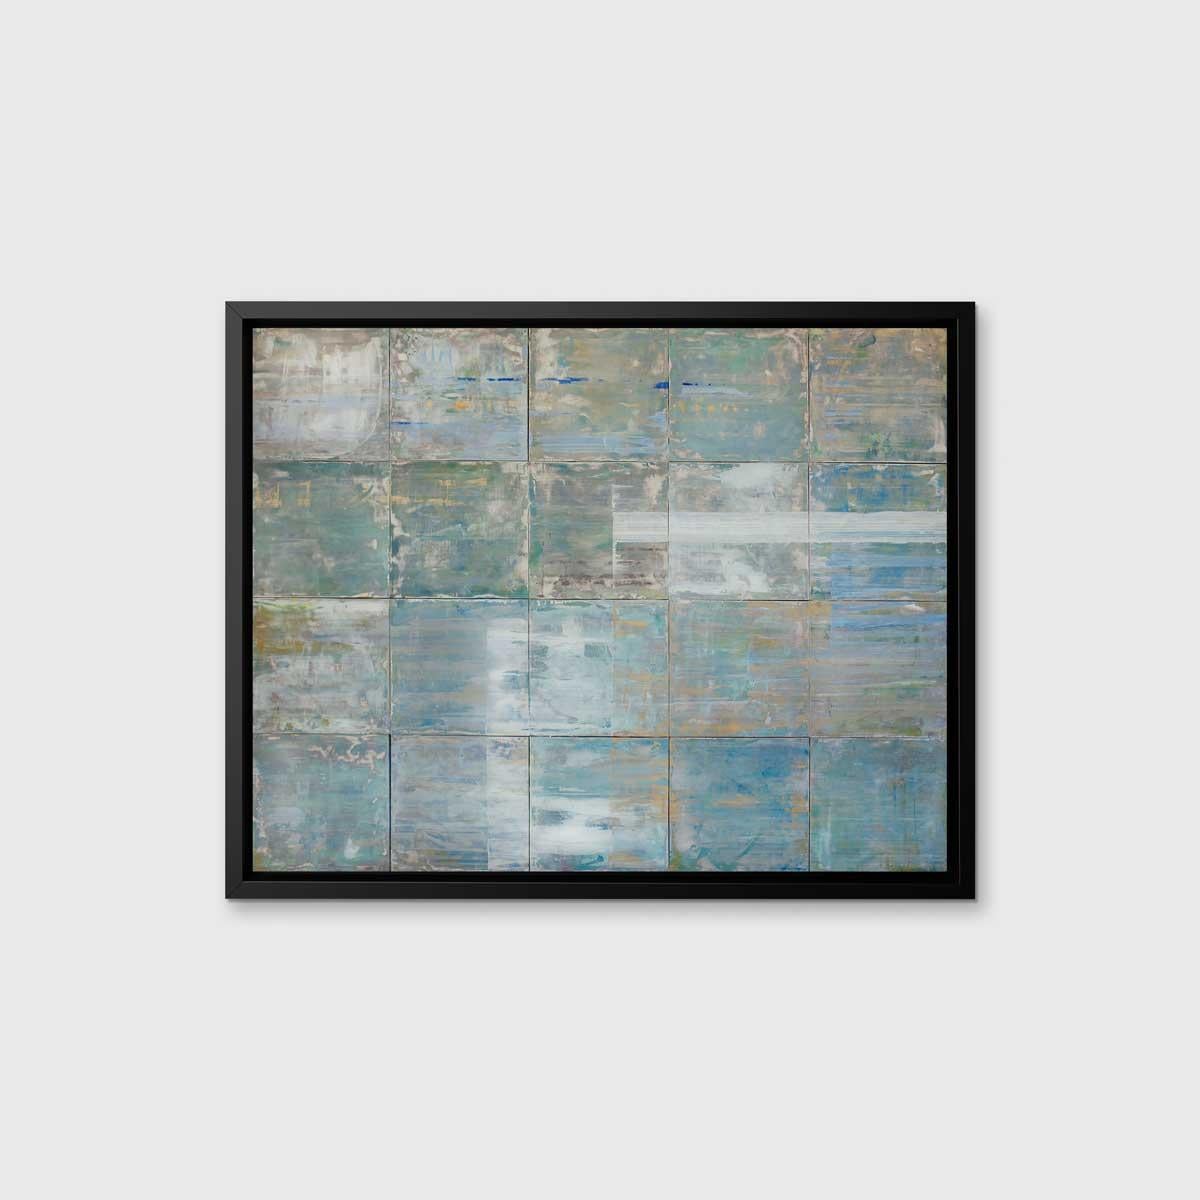 This abstract limited edition print by artist Ned Martin features his signature rectangular pattern in a cool palette. A warm under-layer is just visible, which lightly contrasts the blue and white tones which are layered over top. 

This Limited